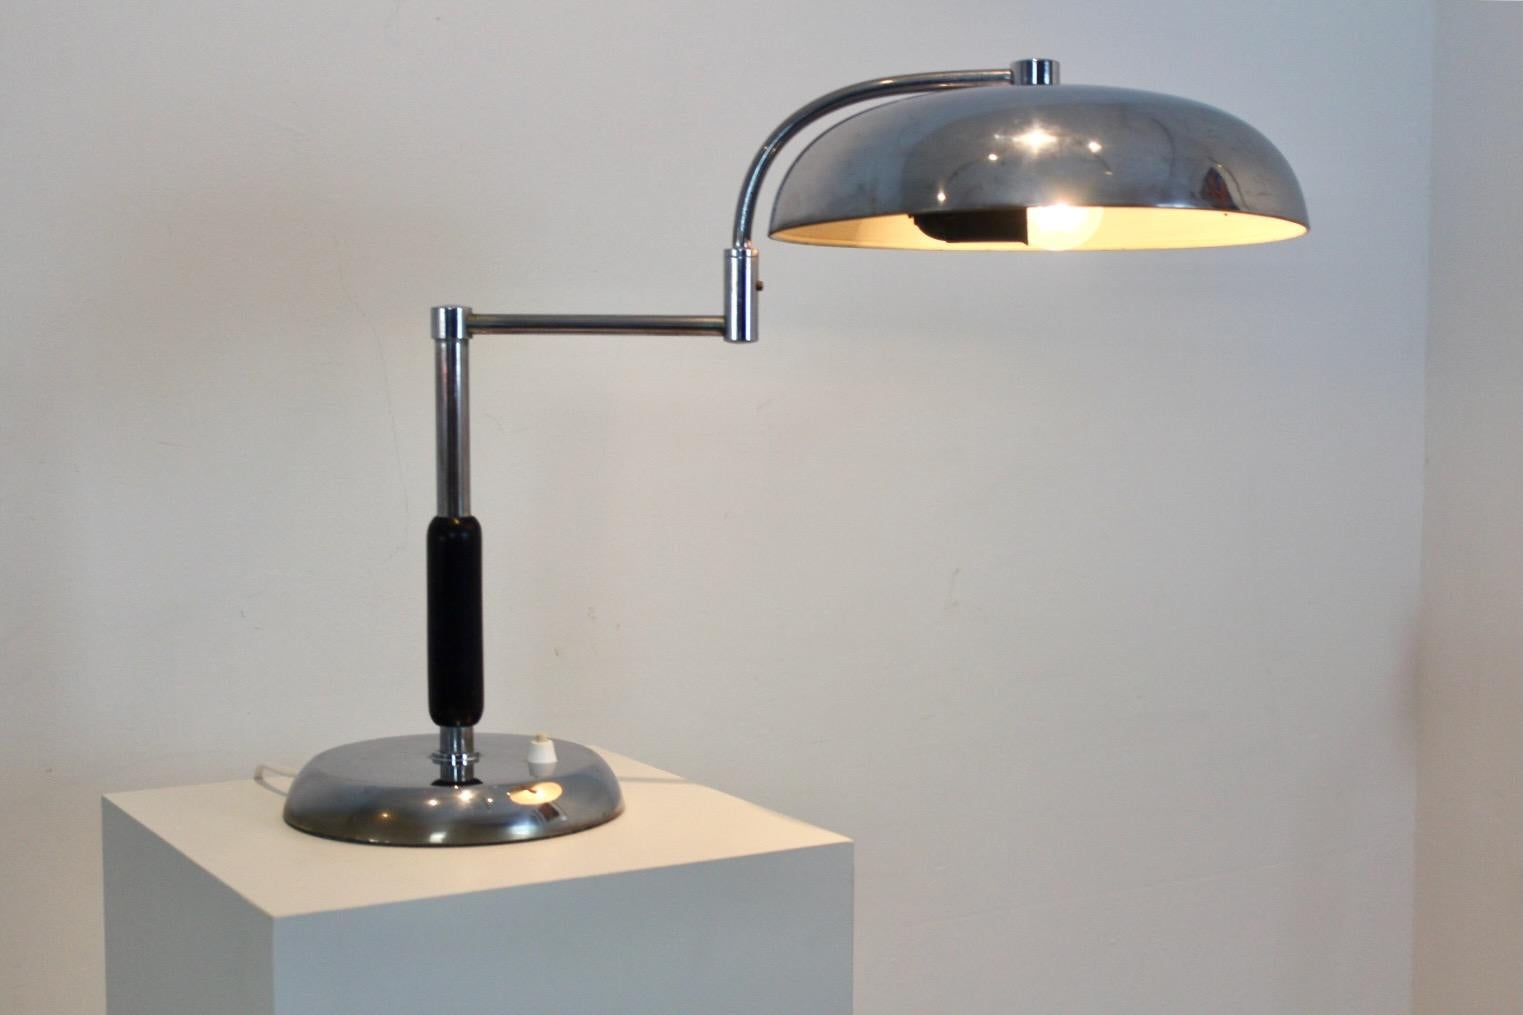 Adjustable Modernist Desk Lamp by Maison Desny Paris In Good Condition For Sale In Voorburg, NL